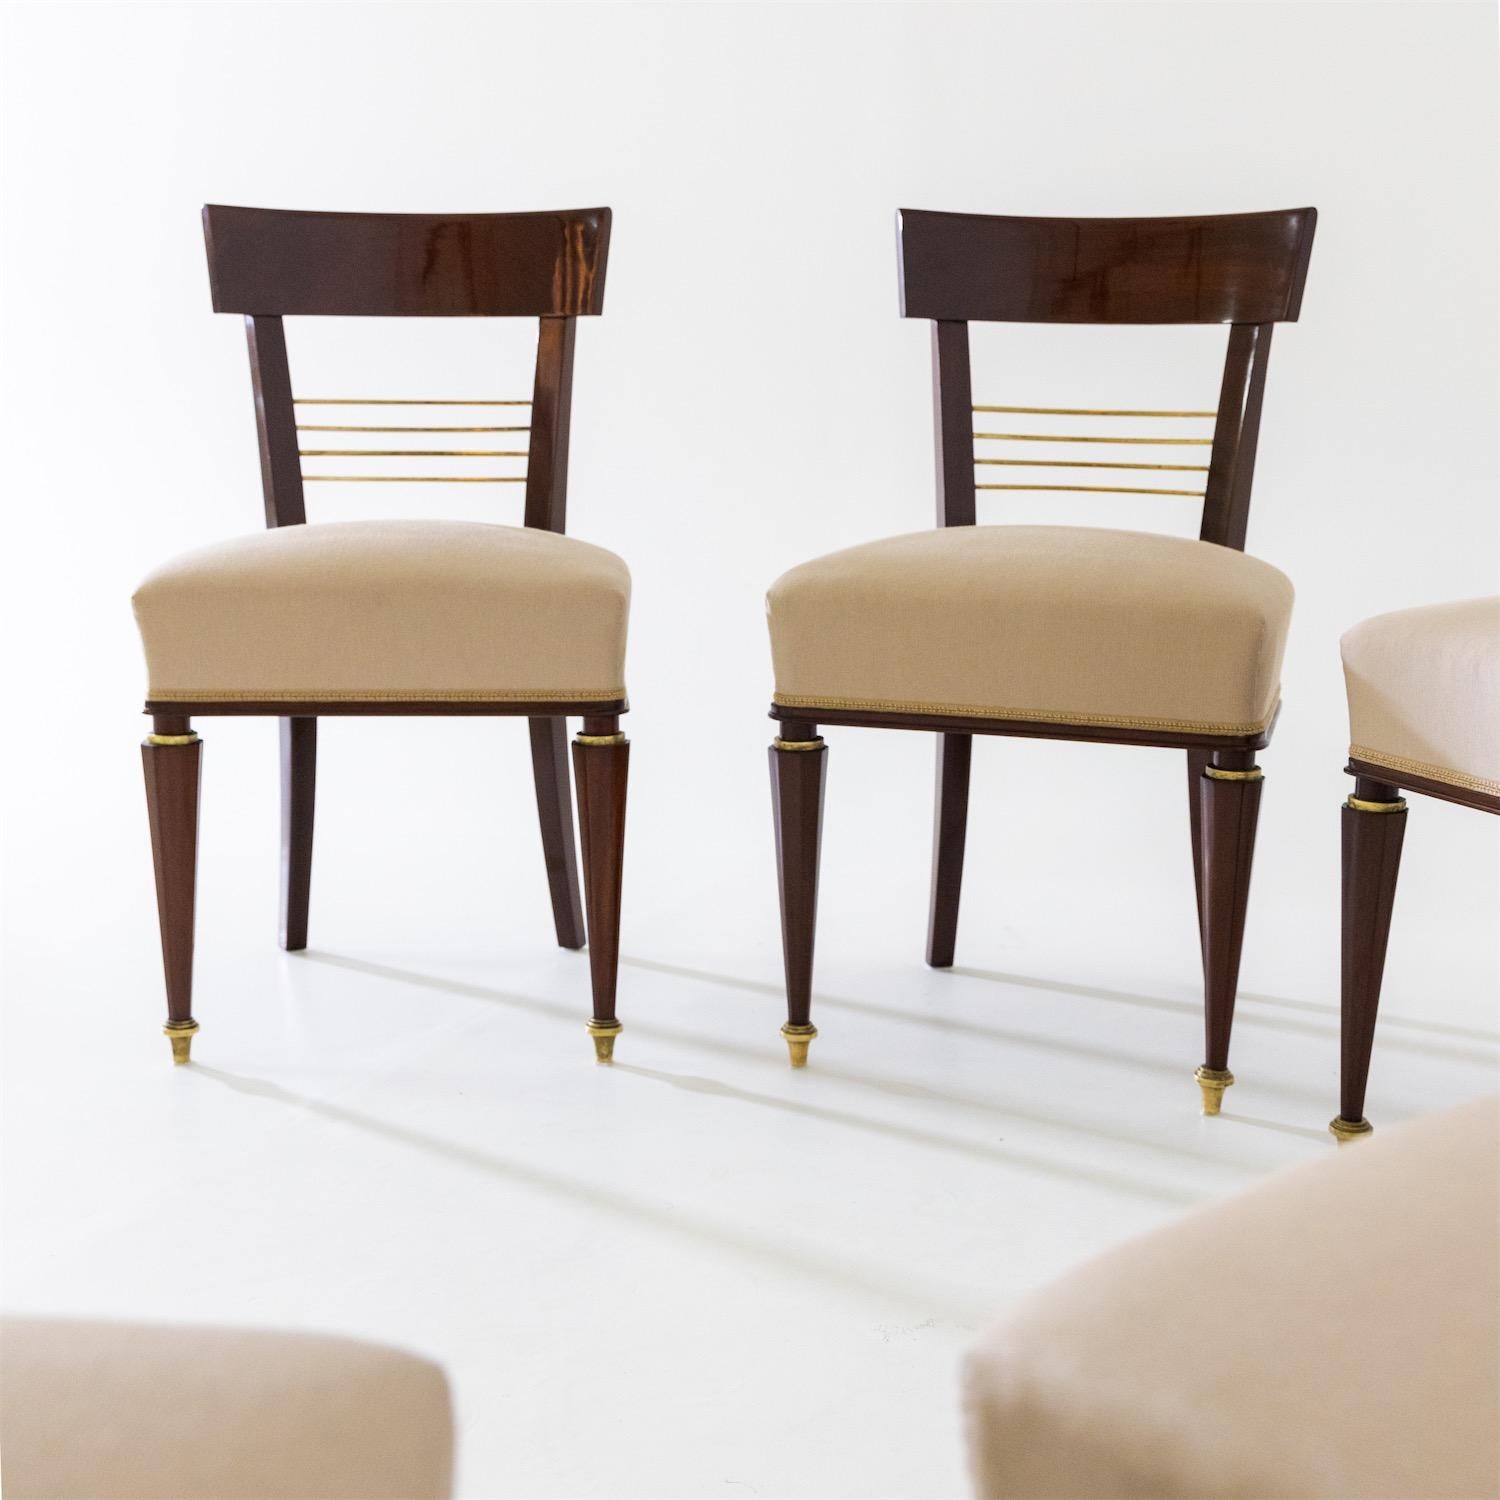 Set of Six Dining Room Chairs, Mid-19th Century 5